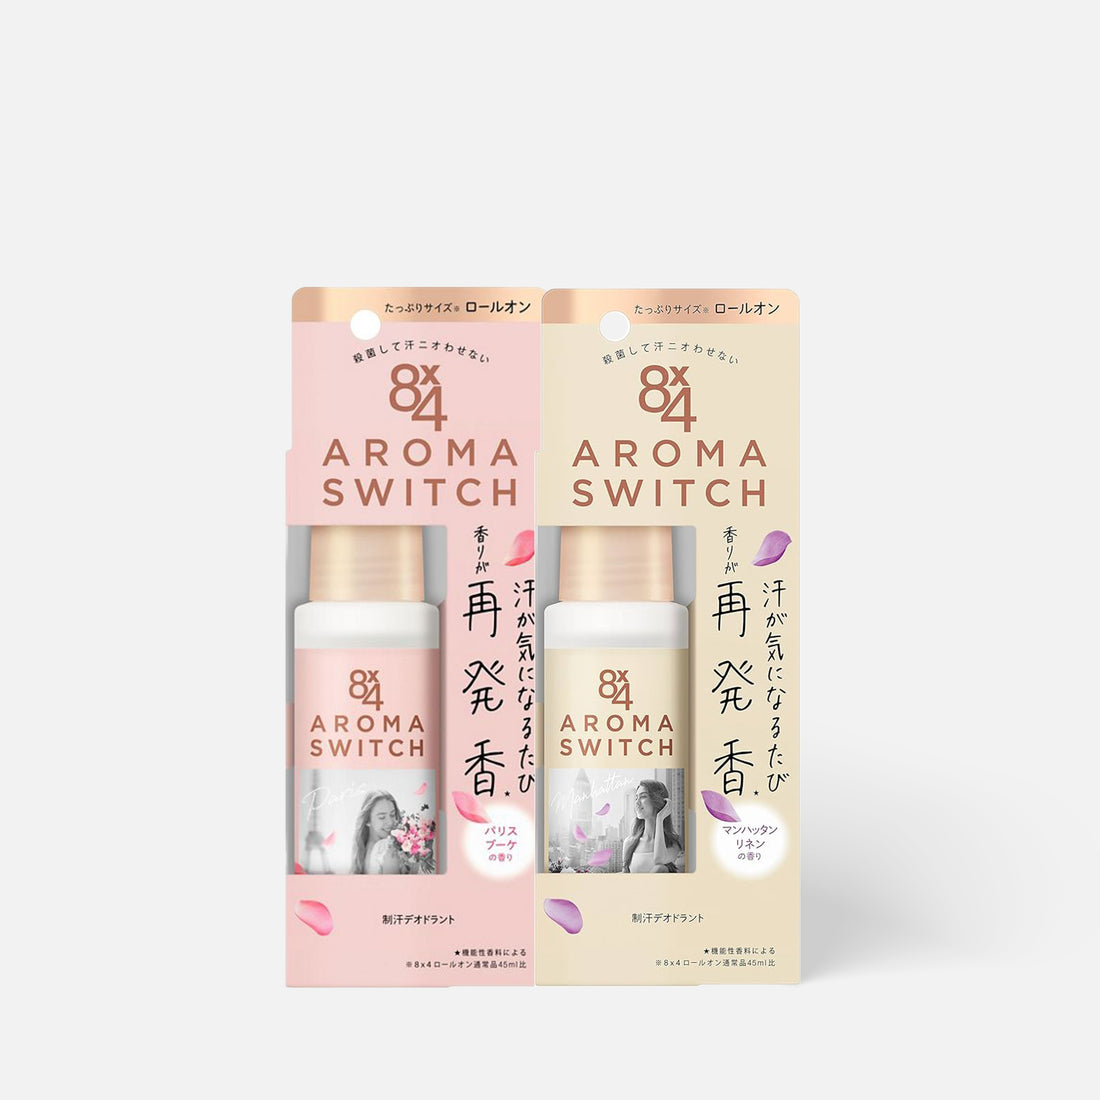 KAO 8x4 Aroma Switch Roll On Paris Bouquet Scent 65ml